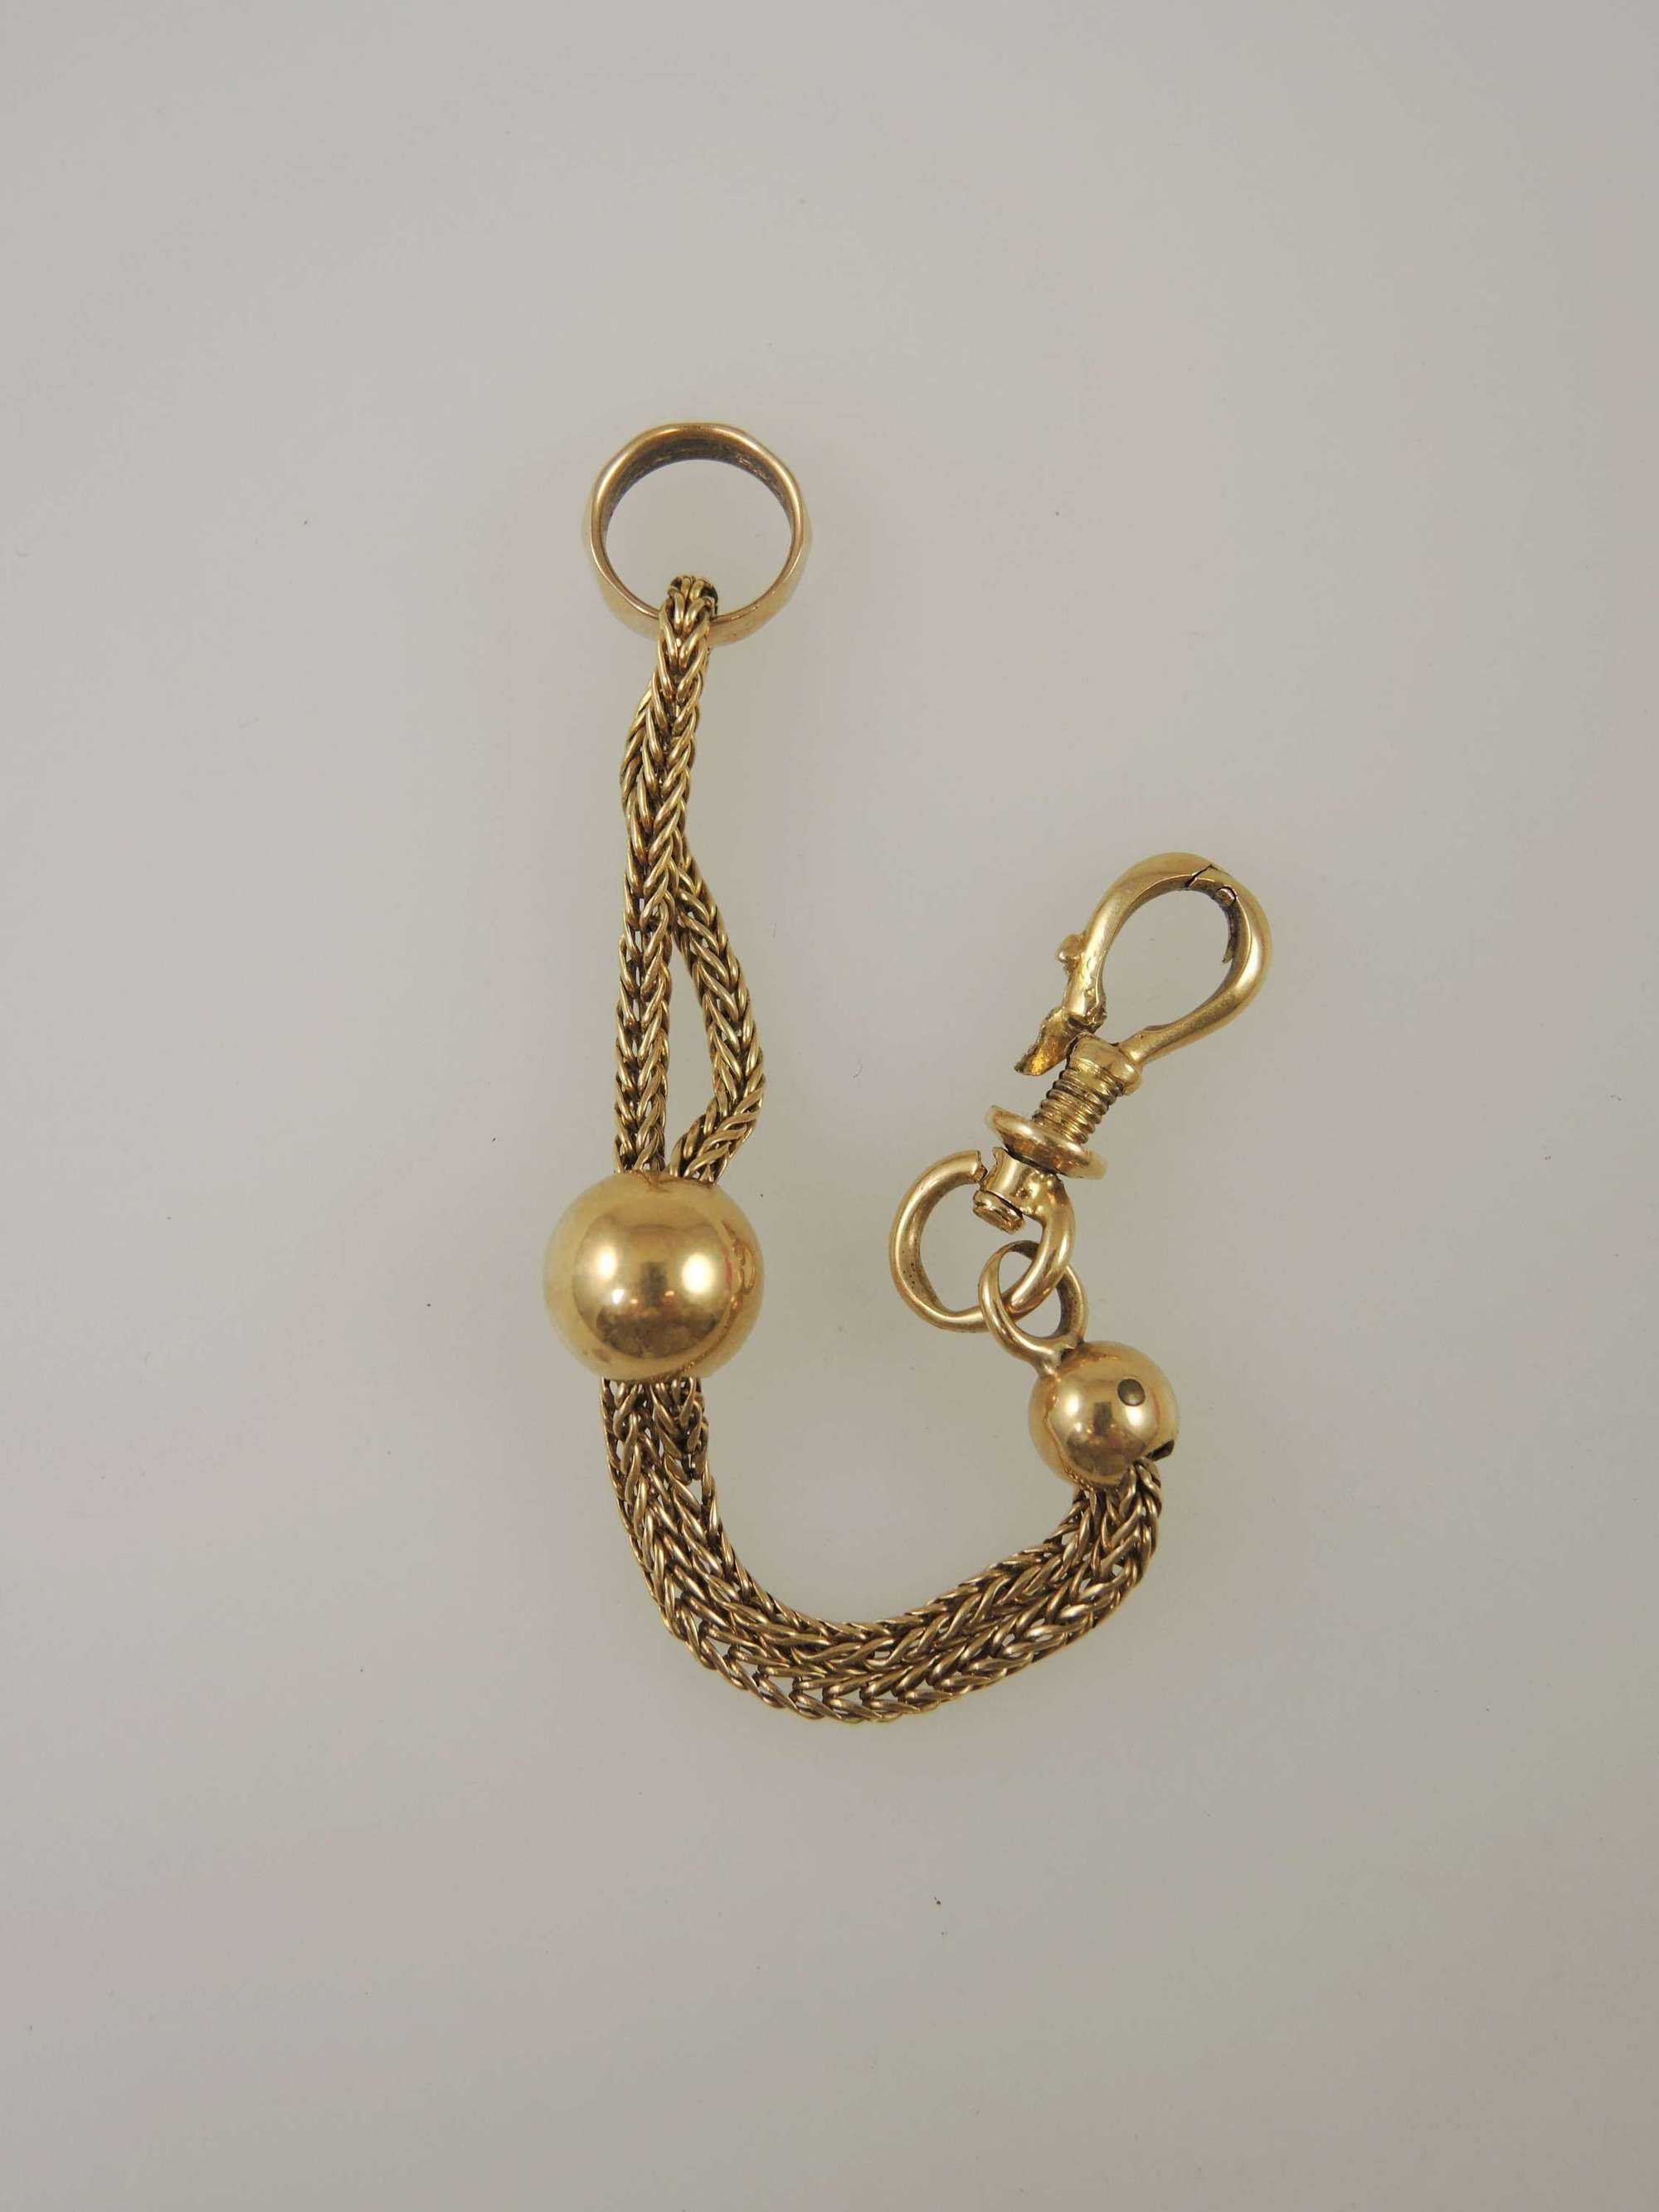 Solid 18K gold pocket watch chain c1820